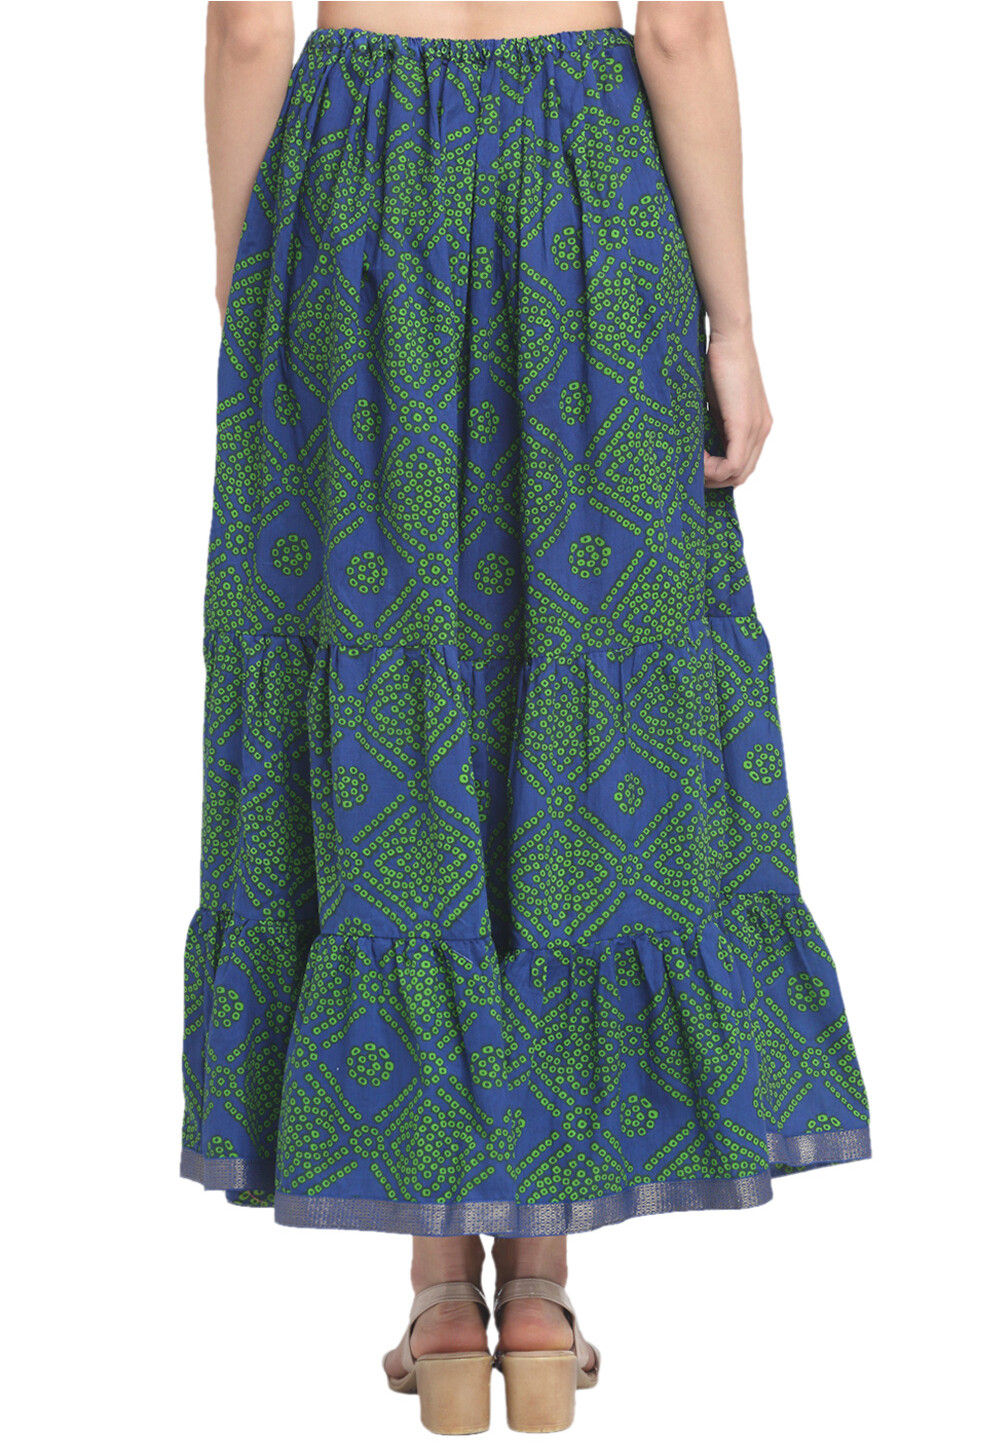 Buy Bandhej Pure Cotton Tiered Skirt in Navy Blue Online : BRJ807 ...